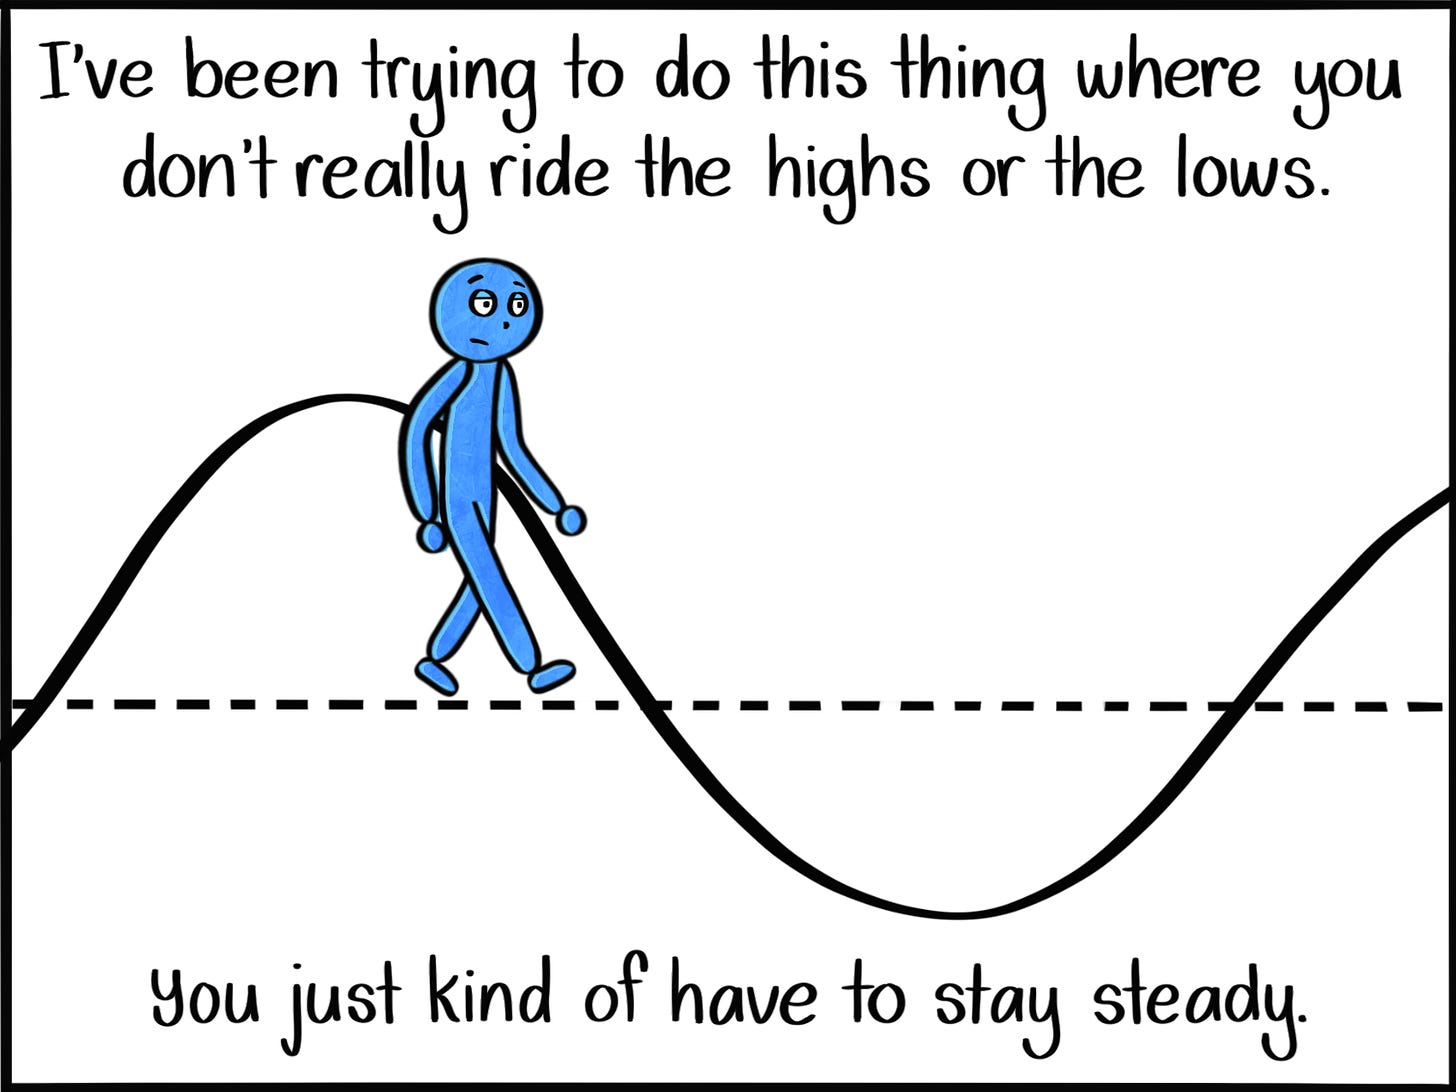 Caption: I've been trying to do this thing where you don't really ride the highs or the lows. You just kind of have to stay steady. Image: Blue person walks along a straight, horizontal dotted line with a solid wavy line behind them.